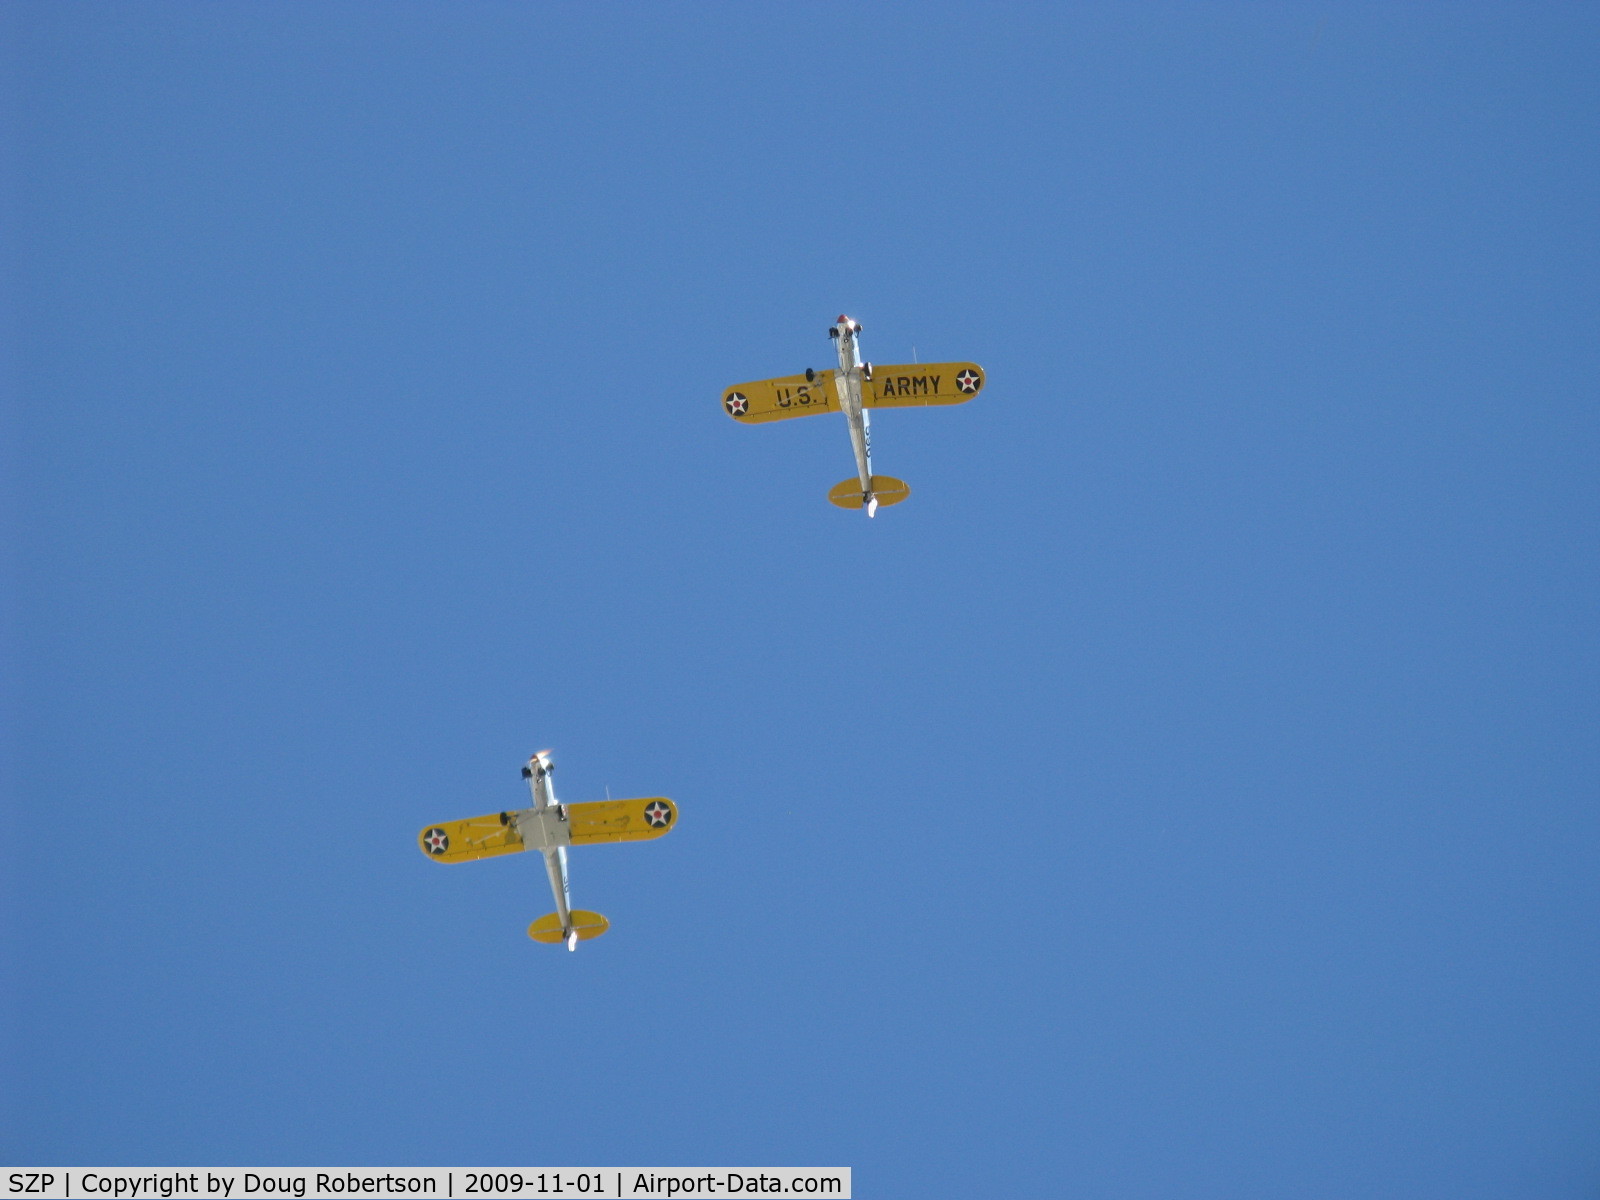 Santa Paula Airport (SZP) - Two Ryan ST-3KRs as PT-22s, N58651 #38 and N53271 #596 (in lead) overhead formation with wonderful 5 cylinder Kinner radial rumbles.